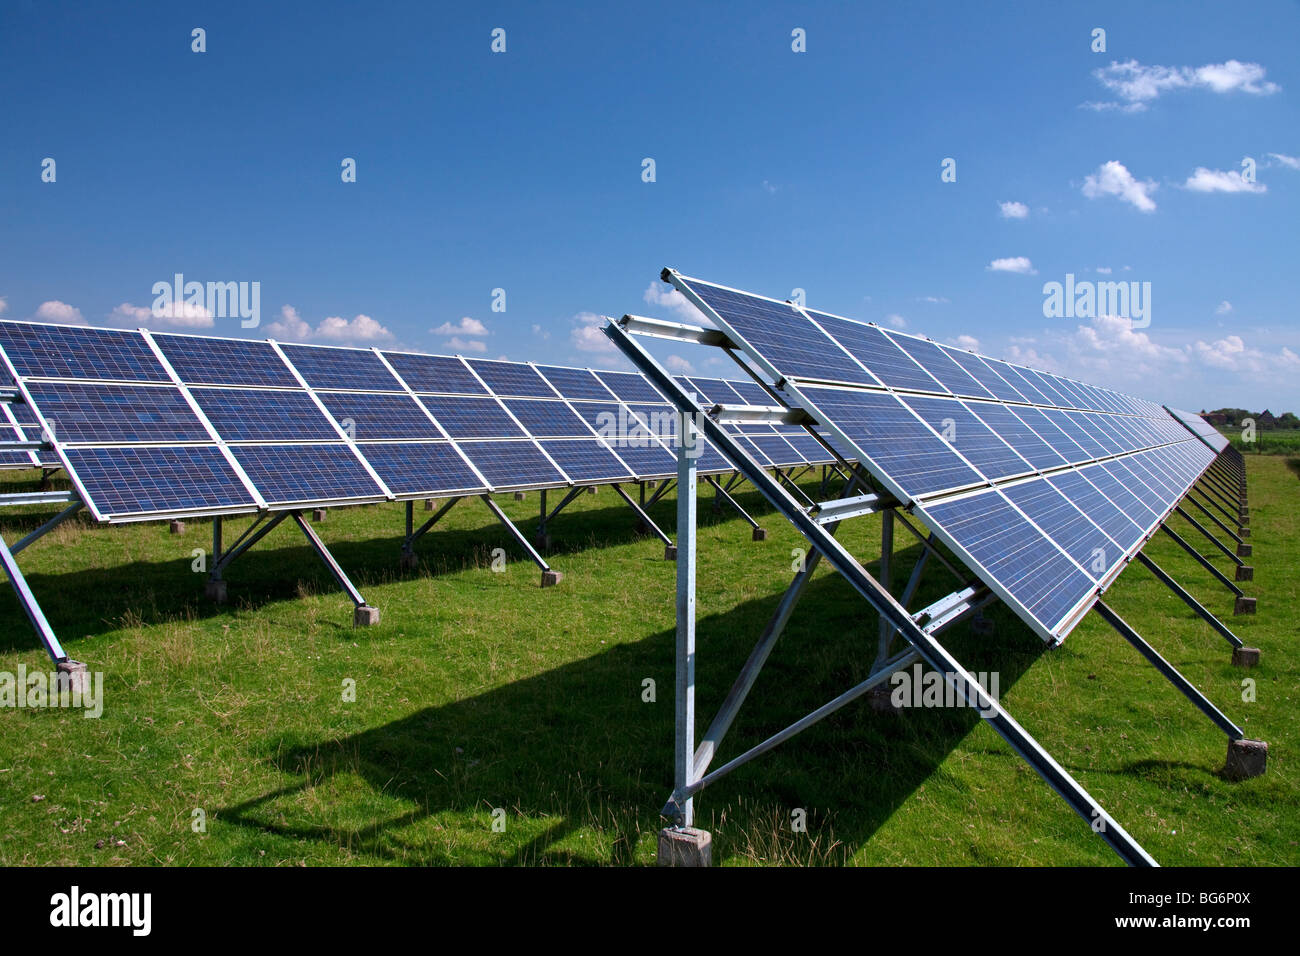 Photovoltaic solar panels for electricity production Stock Photo